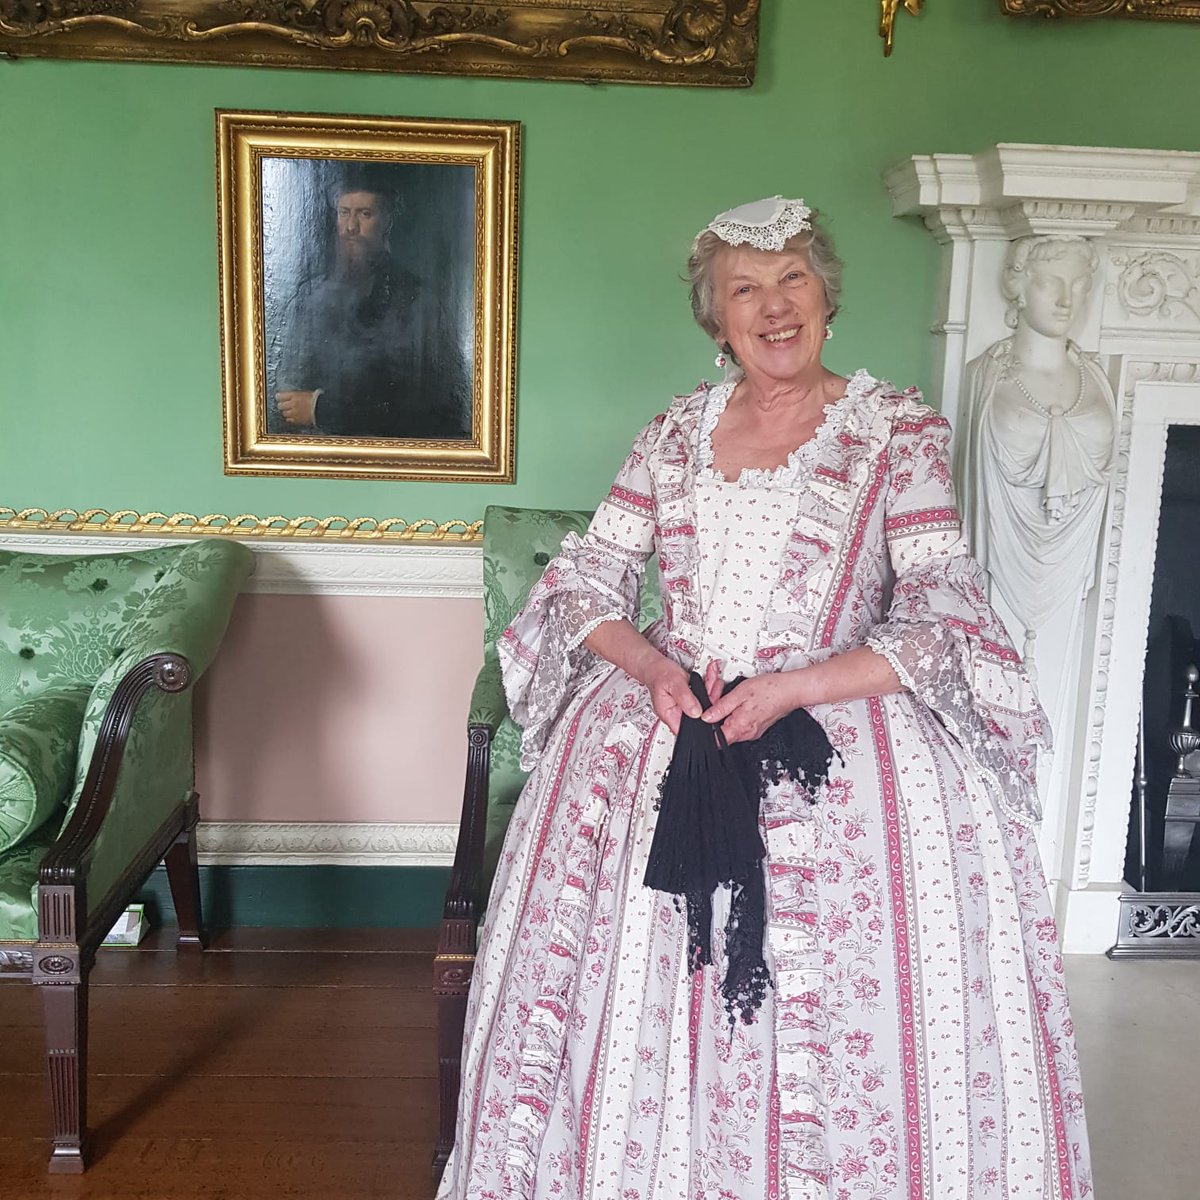 Today at Osterley we've taken a step back in time to Georgian England, with our wonderful costume team dressed to impress! They'll be back again on 10 June, so make sure to visit and see their finery. #georgiancostume #volunteer #houseteam